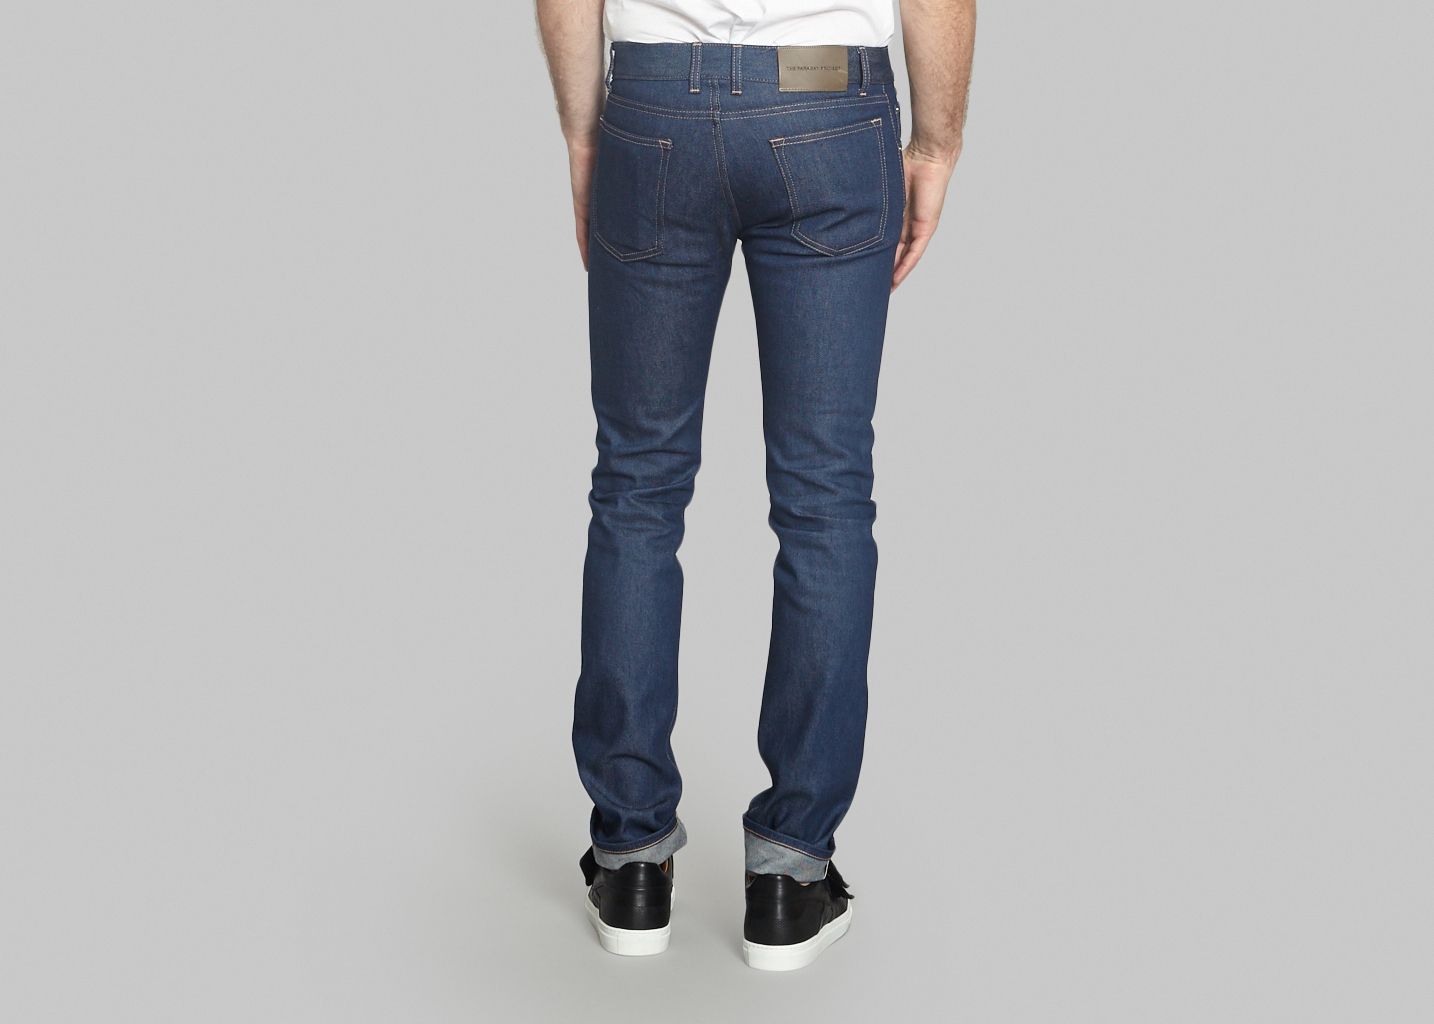 Induction Jeans - The Faraday Project